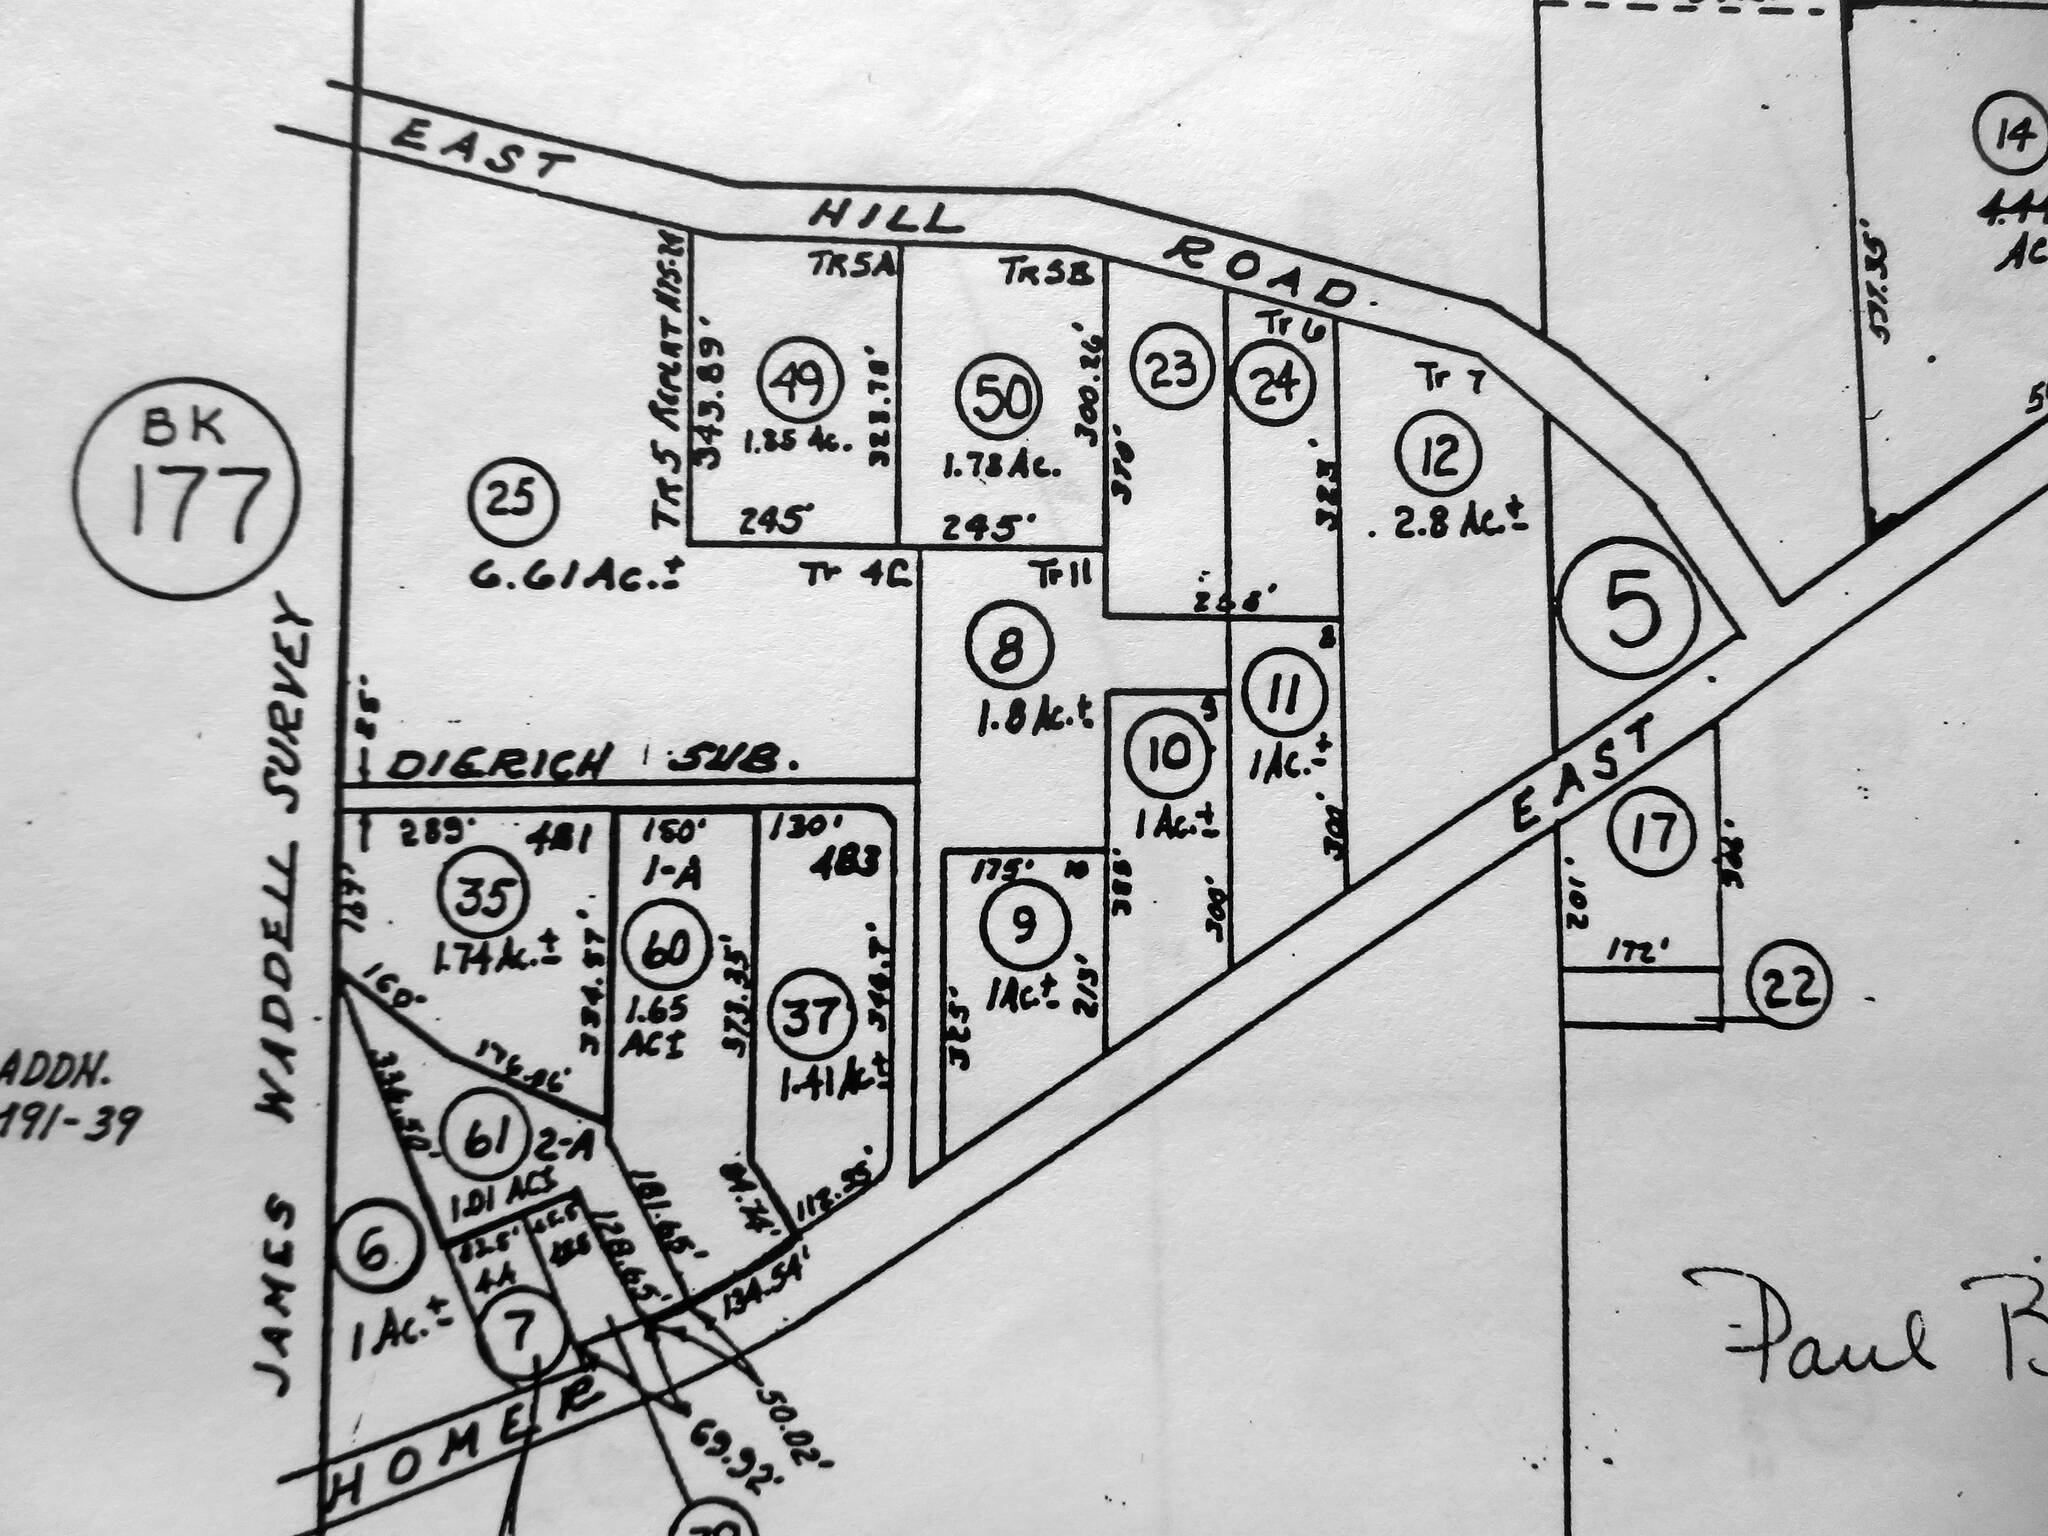 Image courtesy of Homer City Hall
This old survey shows the location of Homer’s nearly century-old community cemetery (lot number 7, in the lower left of document).